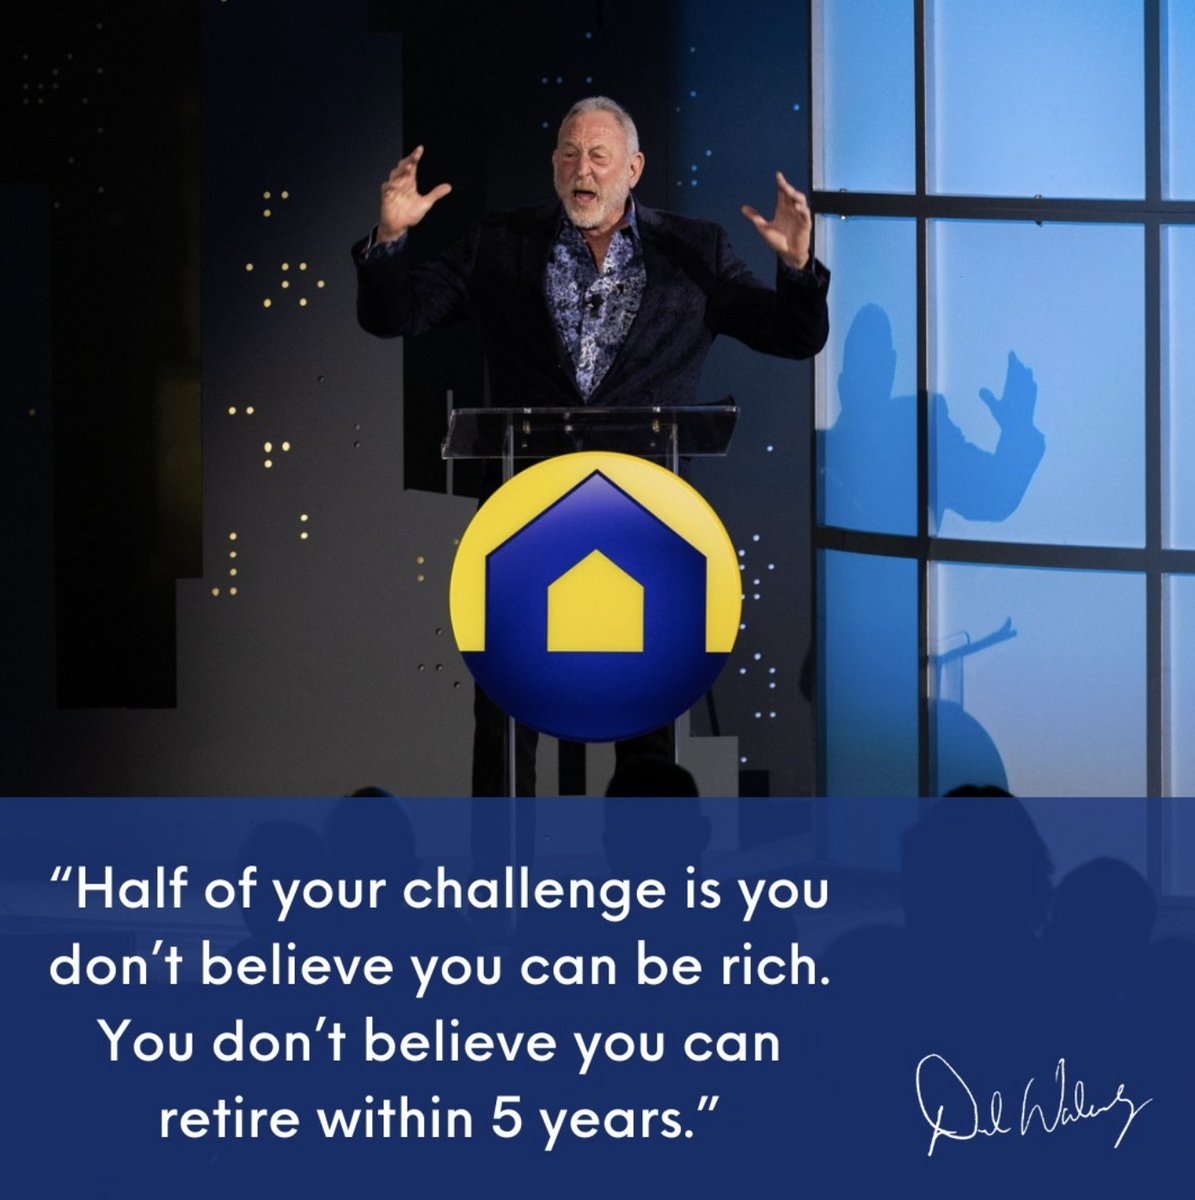 luinc: Our members are REAL PEOPLE with REAL RESULTS. We have helped so many people become wealthy, retire early and live their best lives.

#lifestylesunlimited #passiveincome #realestateinvesting #retireearly #investinginrealestate #investing